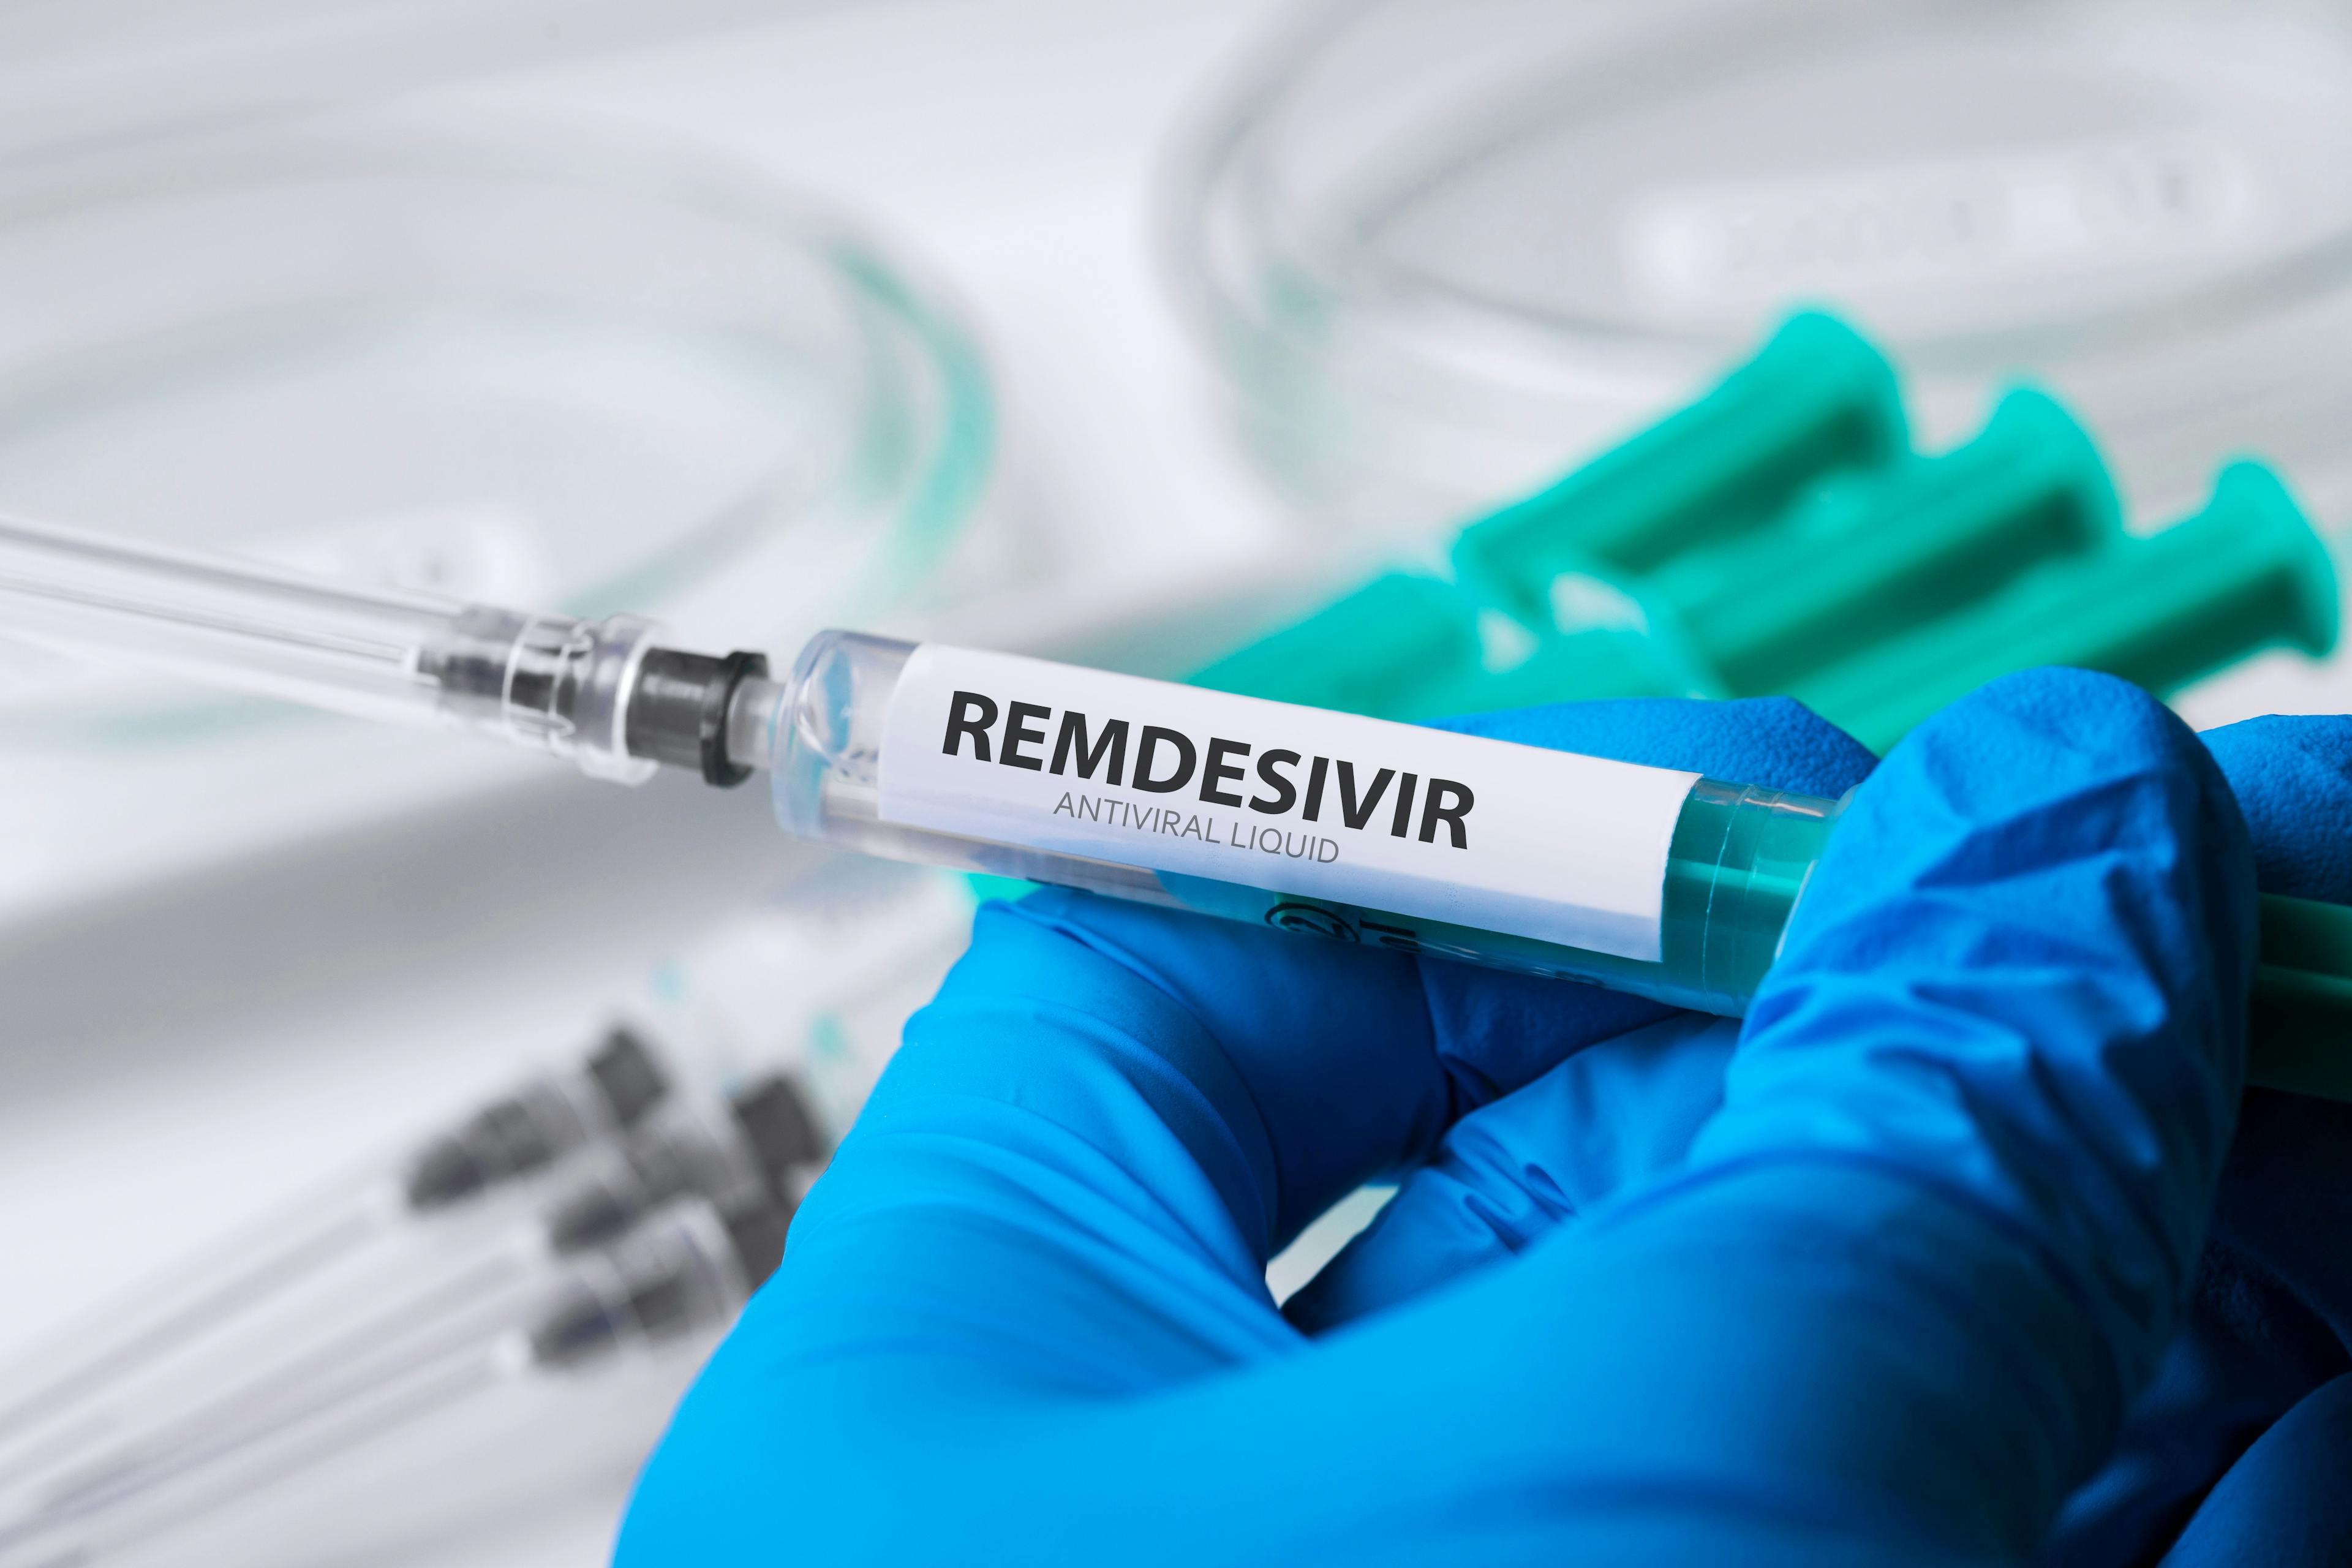 FDA expands emergency use authorization for remdesivir to include all hospitalized COVID-19 patients